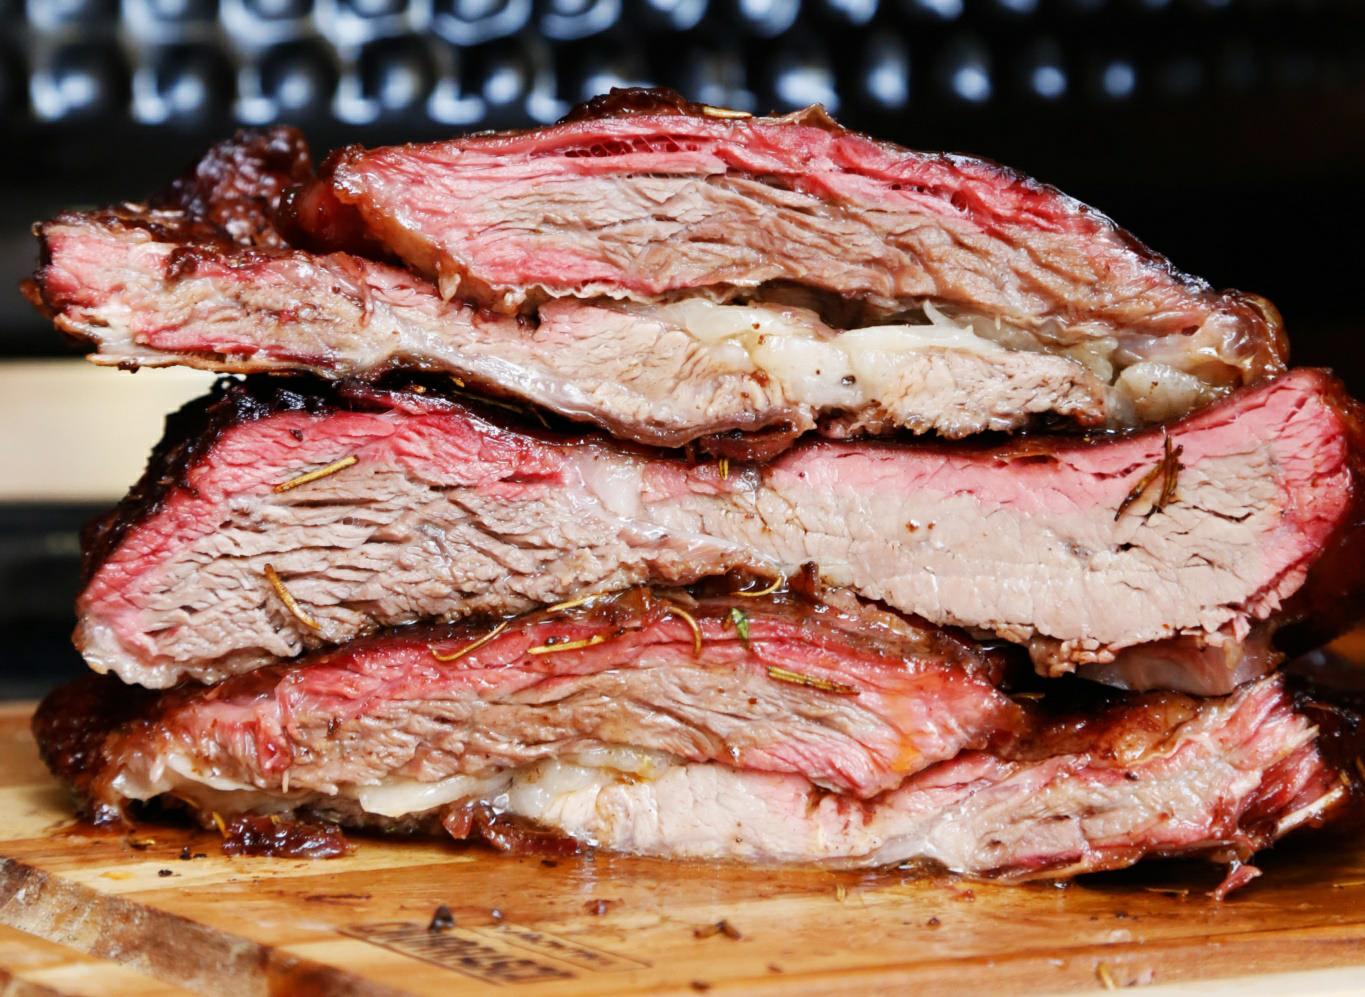 To surprise your Guests this Christmas - Smoked Brisket in Kamado